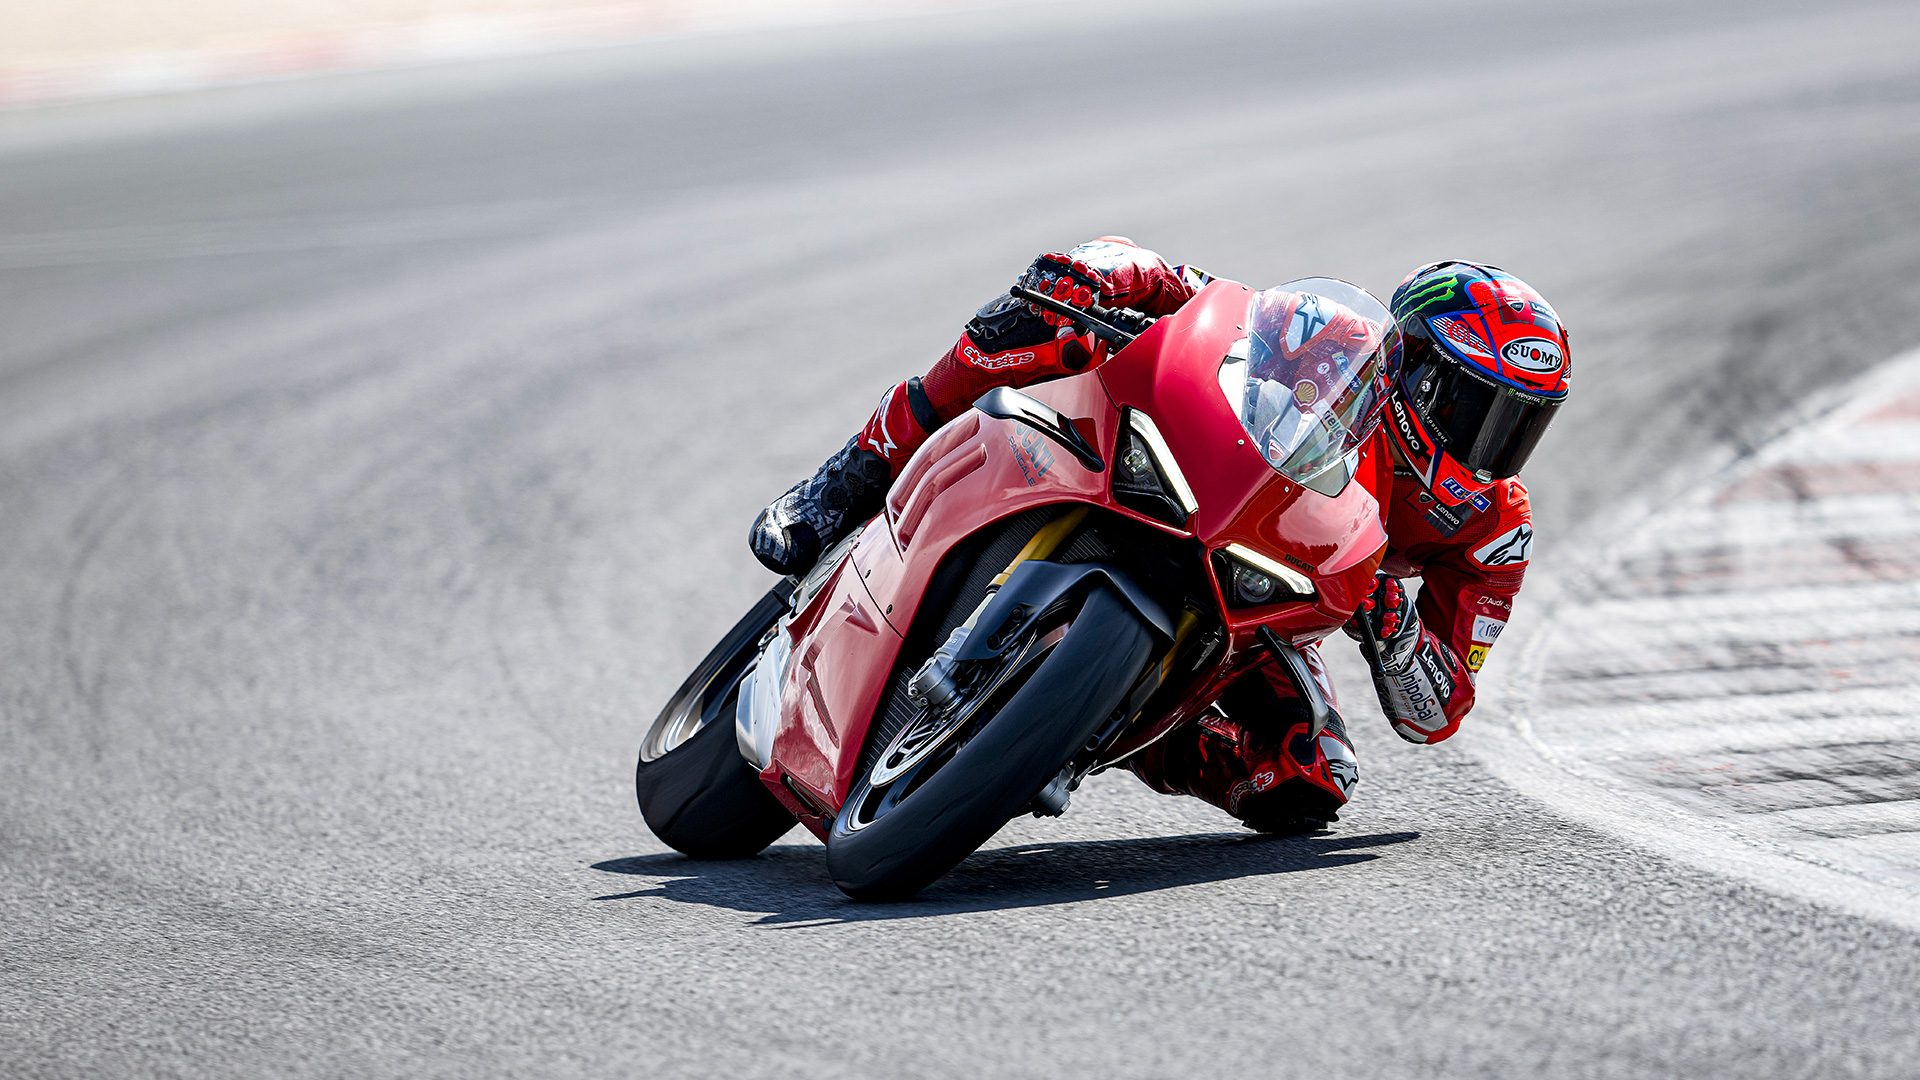 Panigale-MY22-Dinamica-36-Gallery-1920x1080